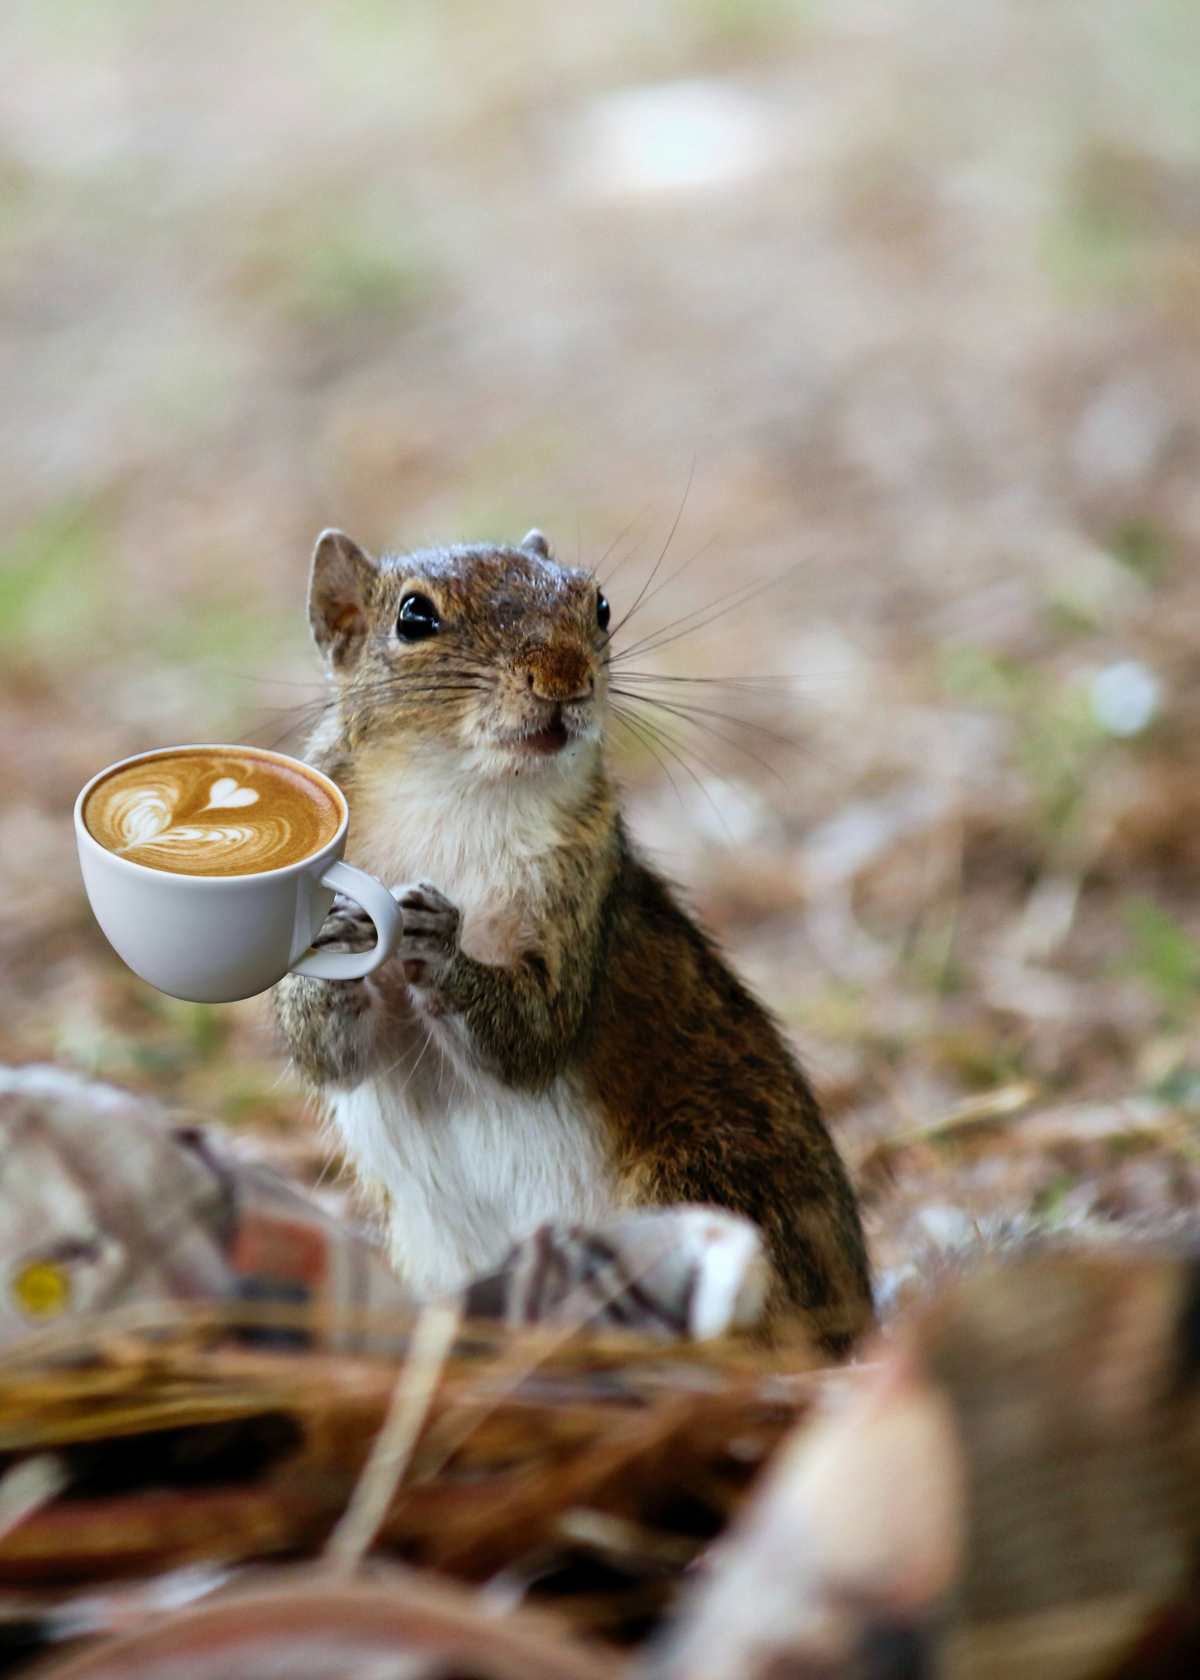 The Great Debate: Do Coffee Grounds Keep Squirrels Away?